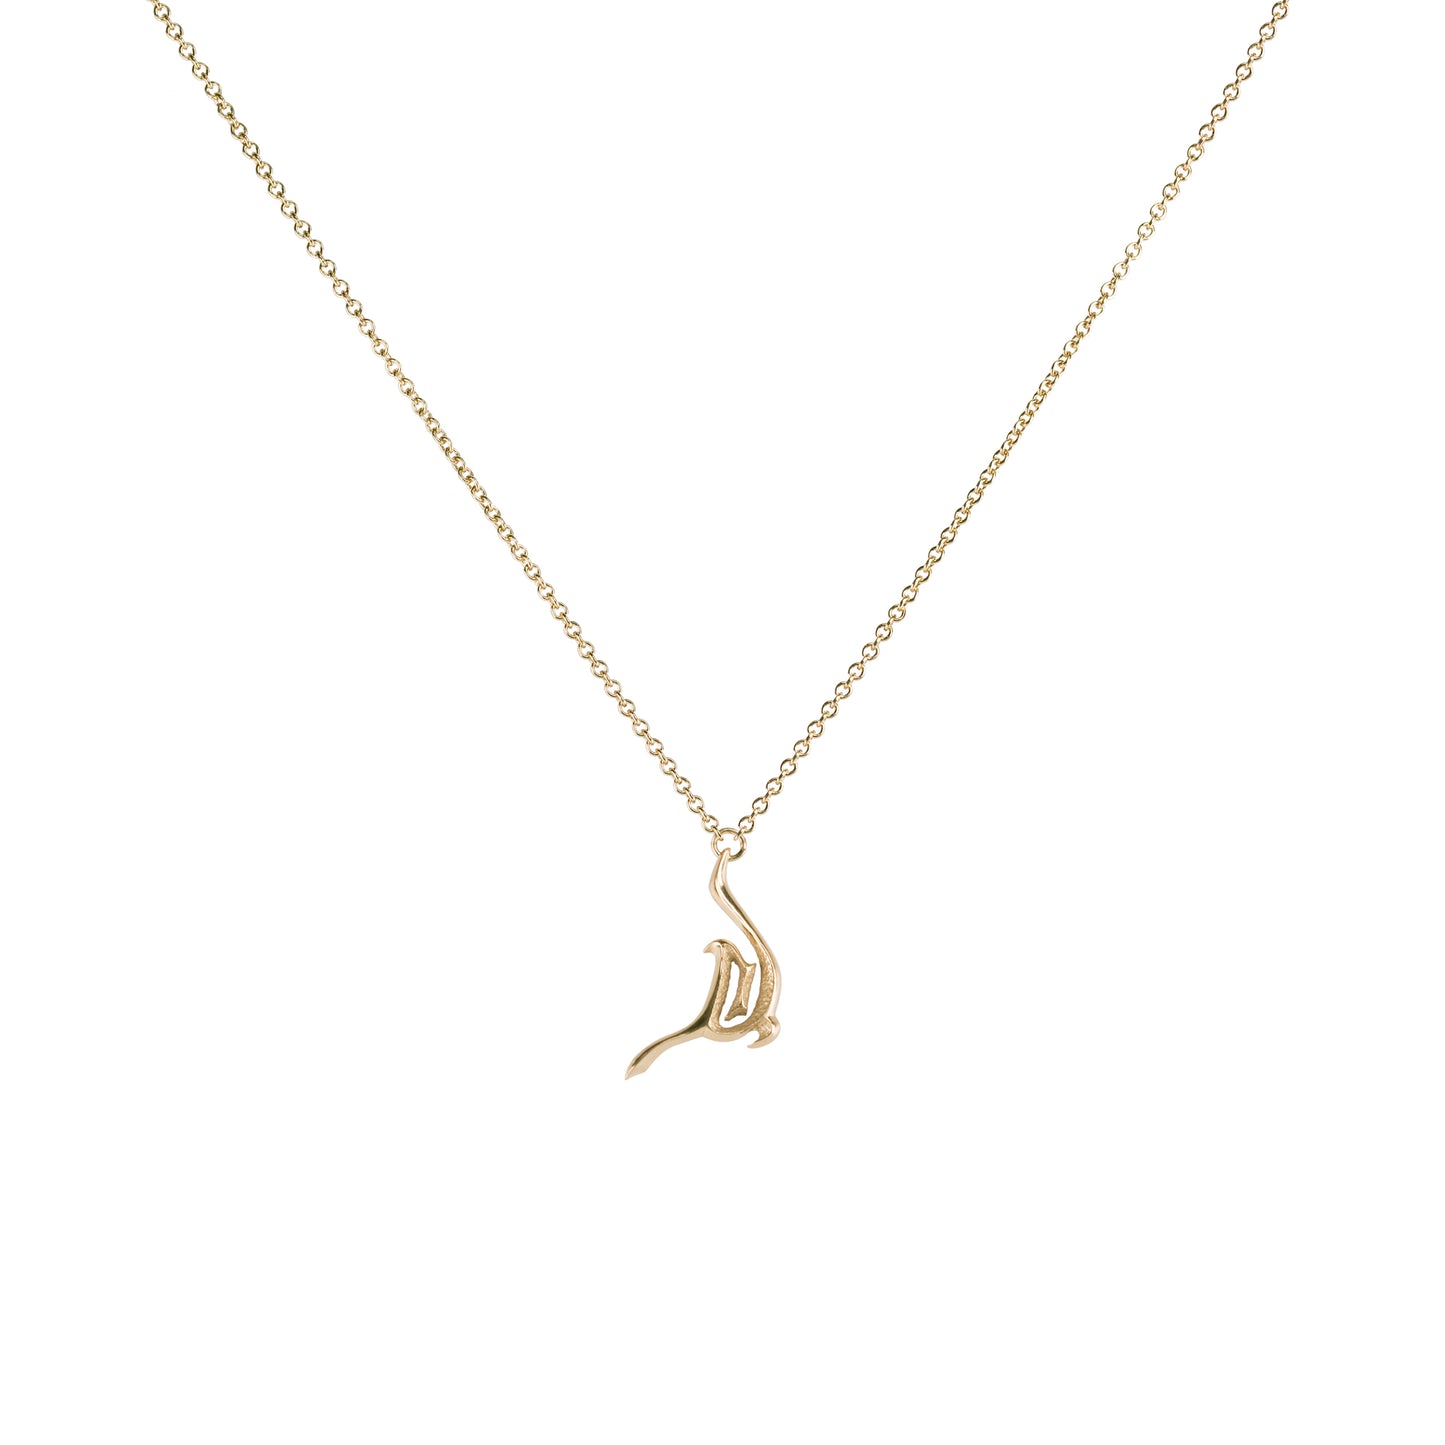 Orme-Brown Fine Contemporary Jewellery Sand Steps Necklace Charm Lizard Track 18ct Yellow Gold Fairmined Eco Sustainable Ethical